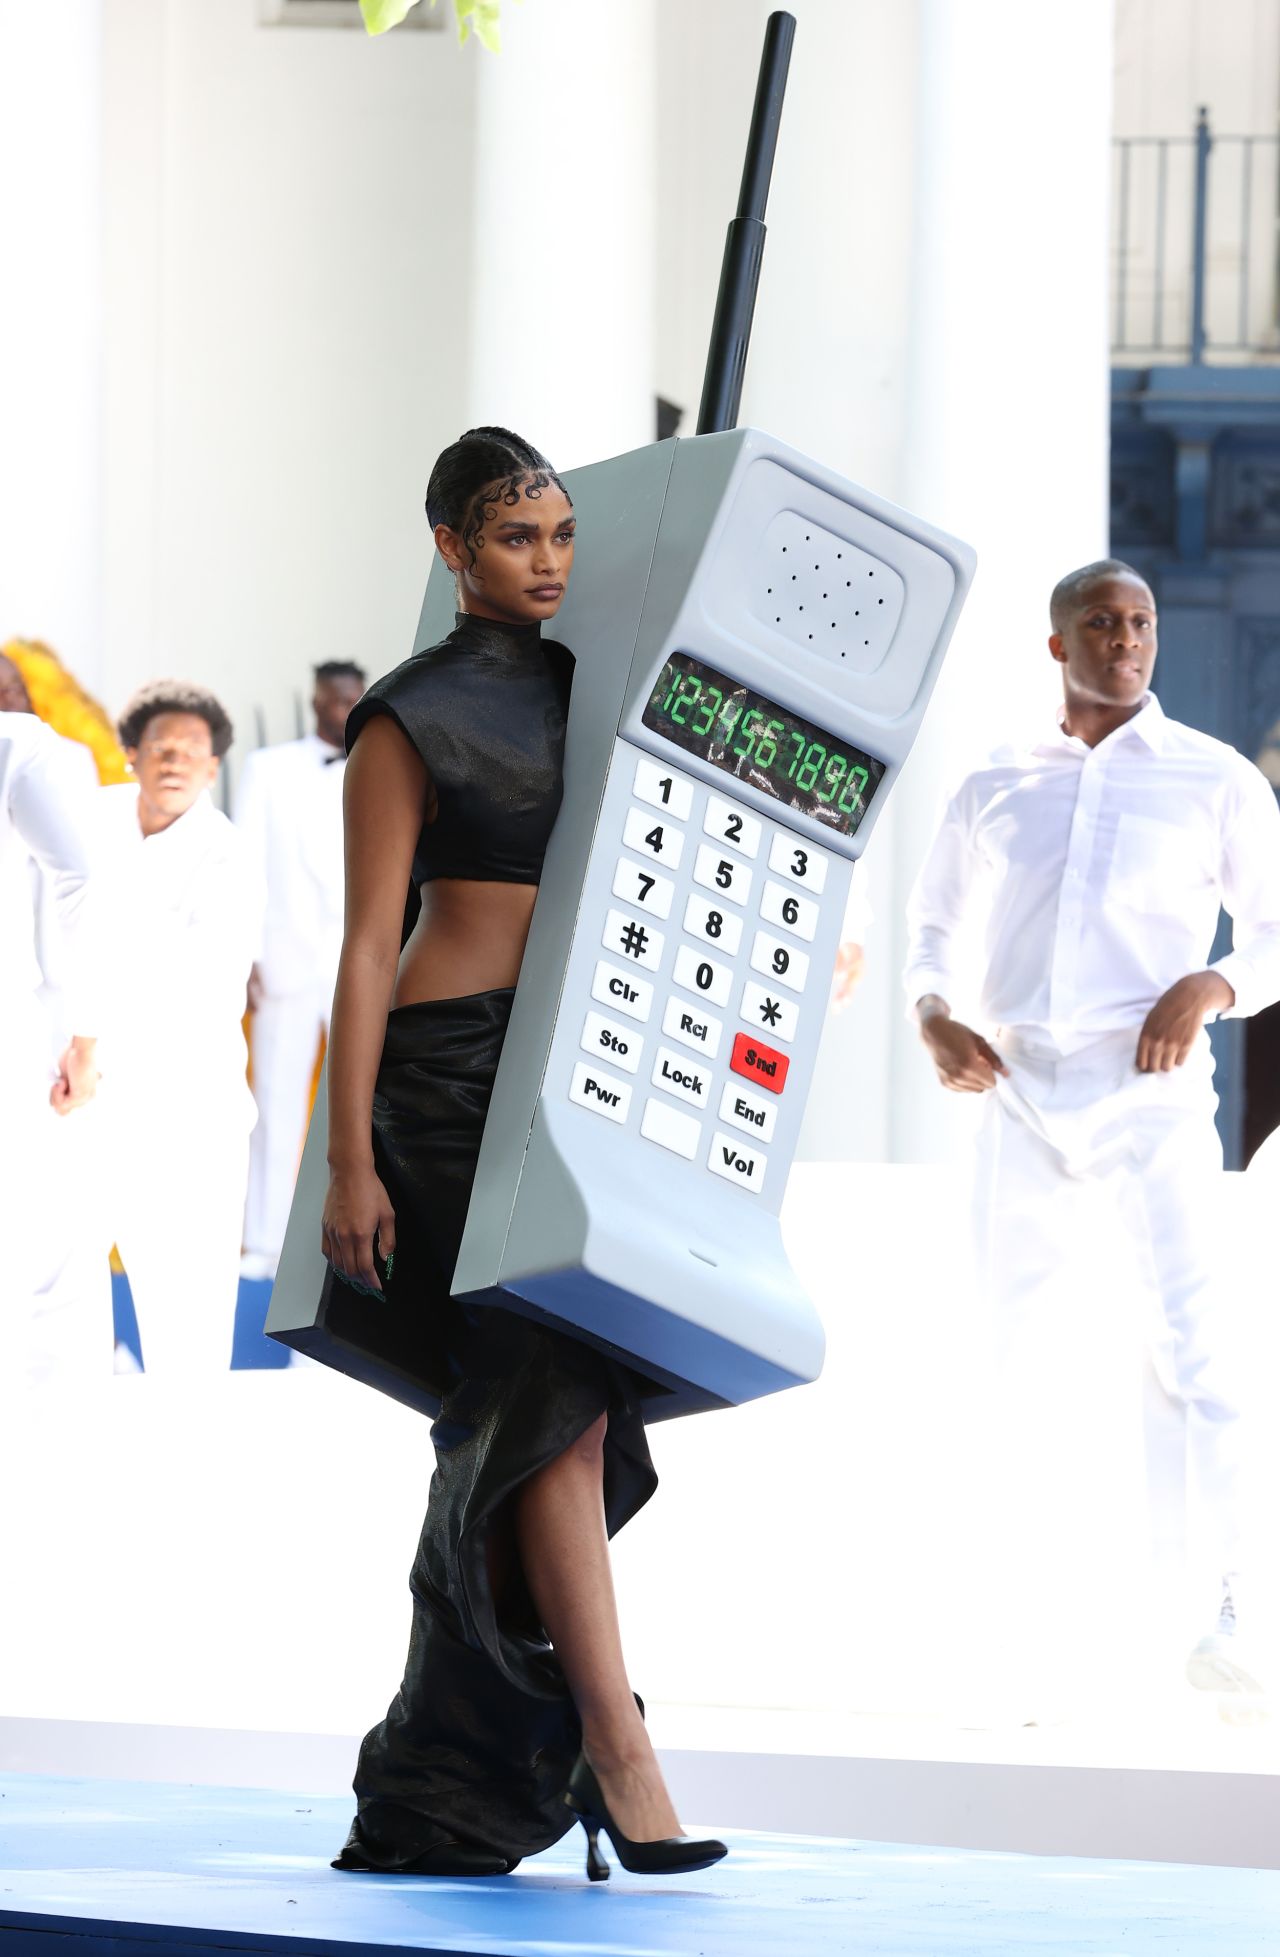 Pyer Moss's debut couture collection referenced everyday objects created by Black inventors.